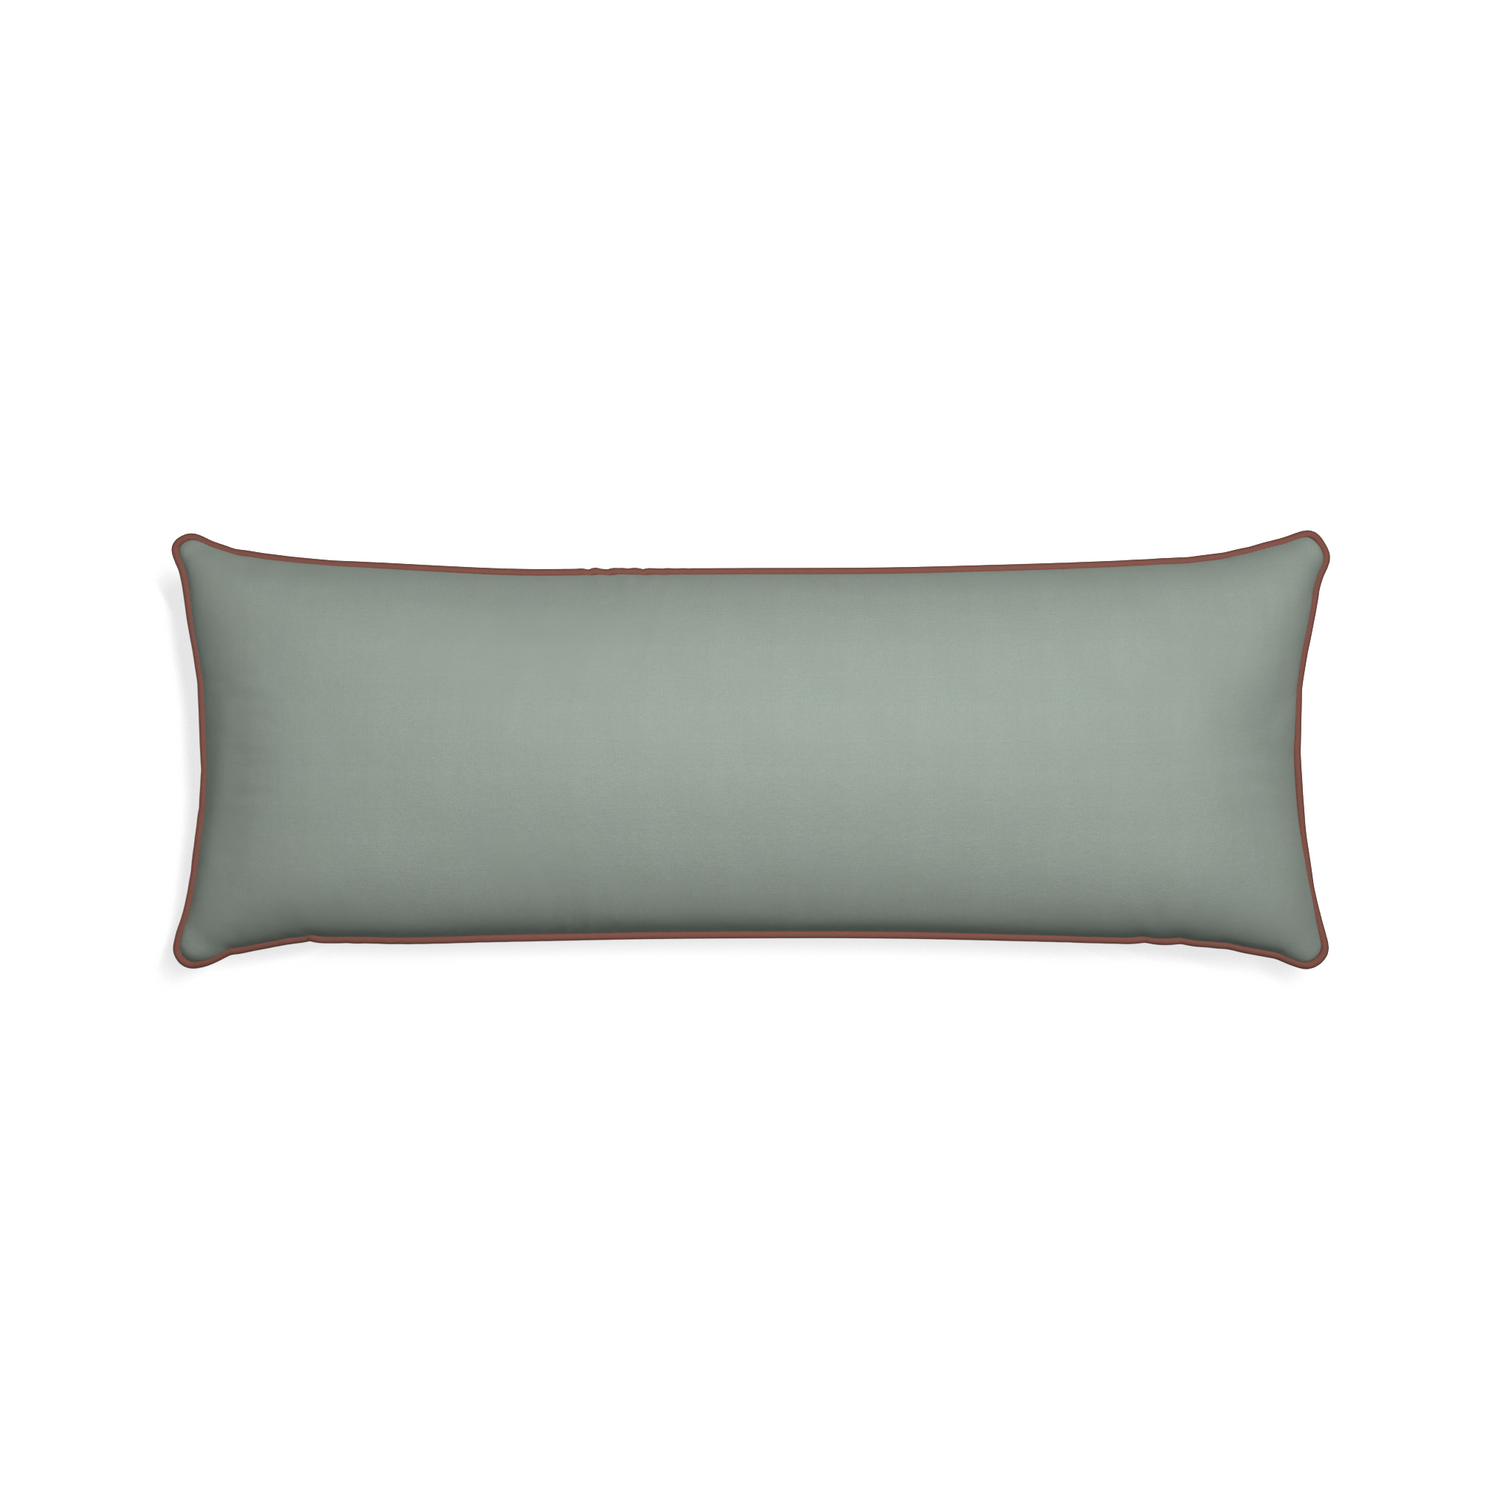 Xl-lumbar sage custom pillow with w piping on white background